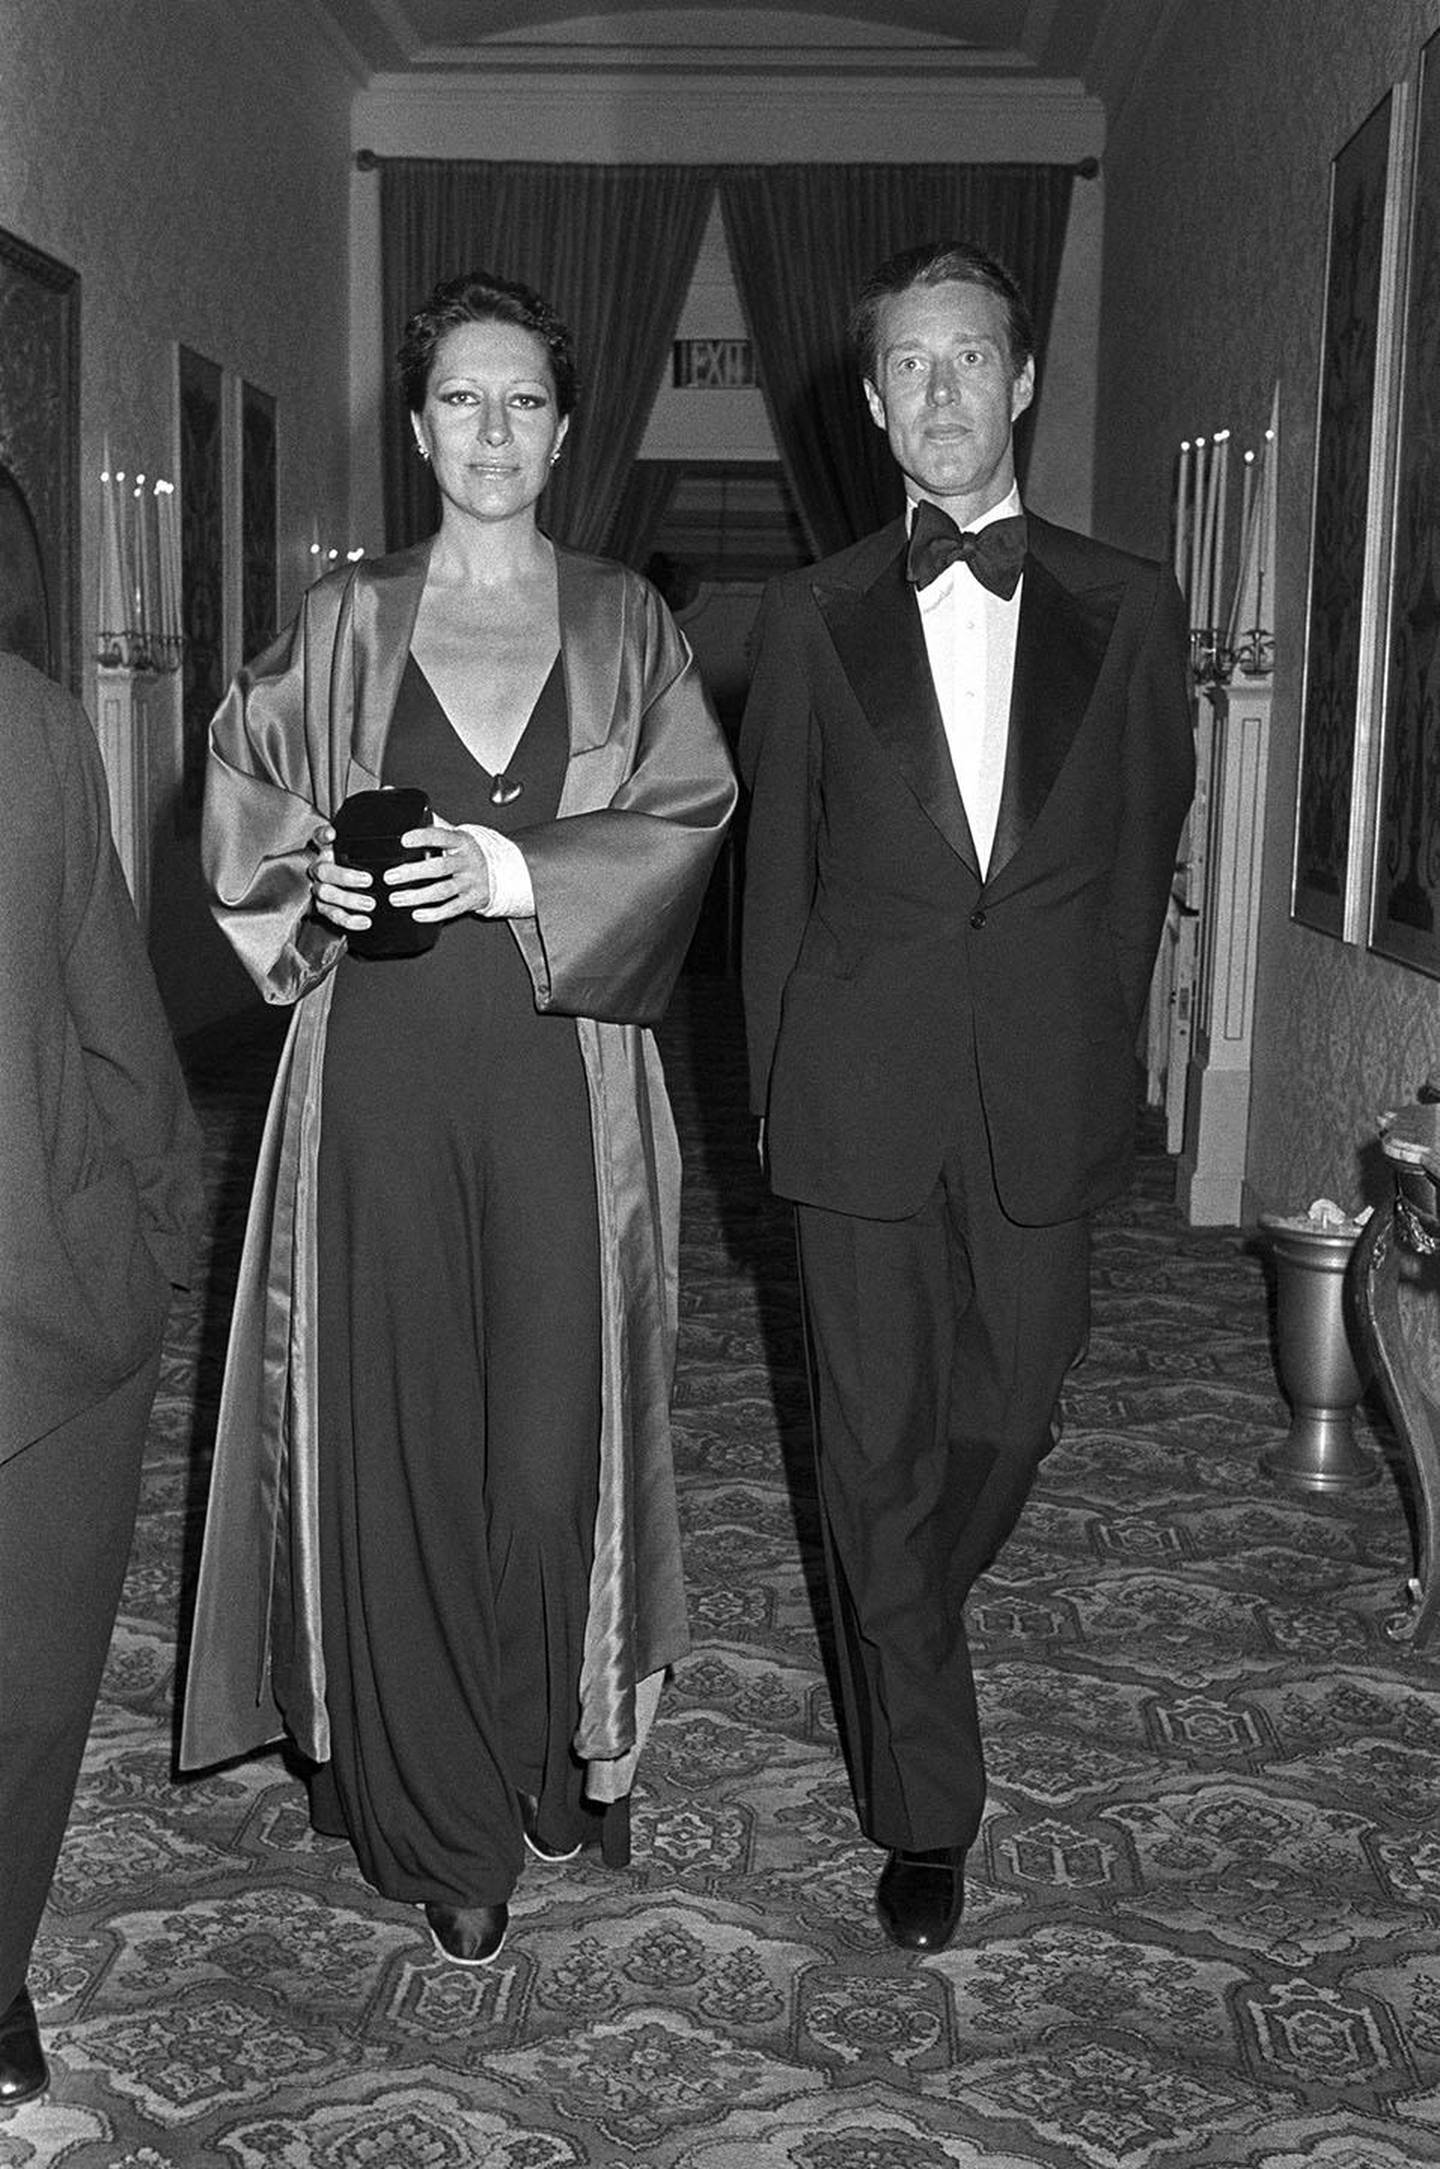 Elsa Peretti and Halston attend the Fragrance Foundation's dinner together in the Plaza Hotel in 1976.